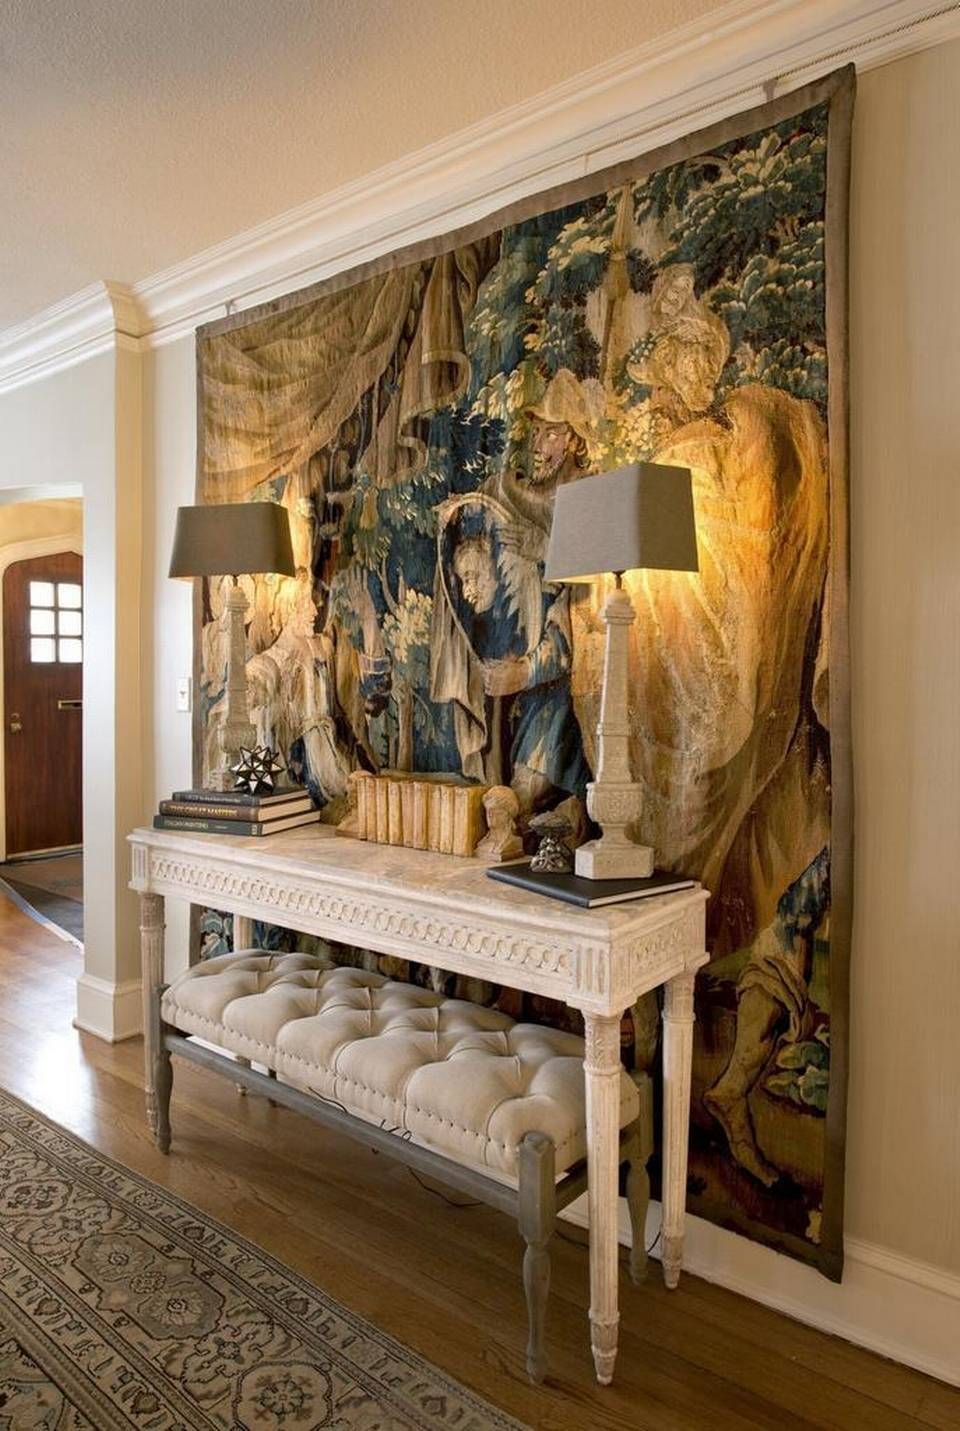 20+ Tapestry Ideas | Tapestry, Wall Tapestry, French Walls Throughout Most Current Blended Fabric Unicorn Captive And Unicorn Hunt Wall Hangings (View 11 of 20)